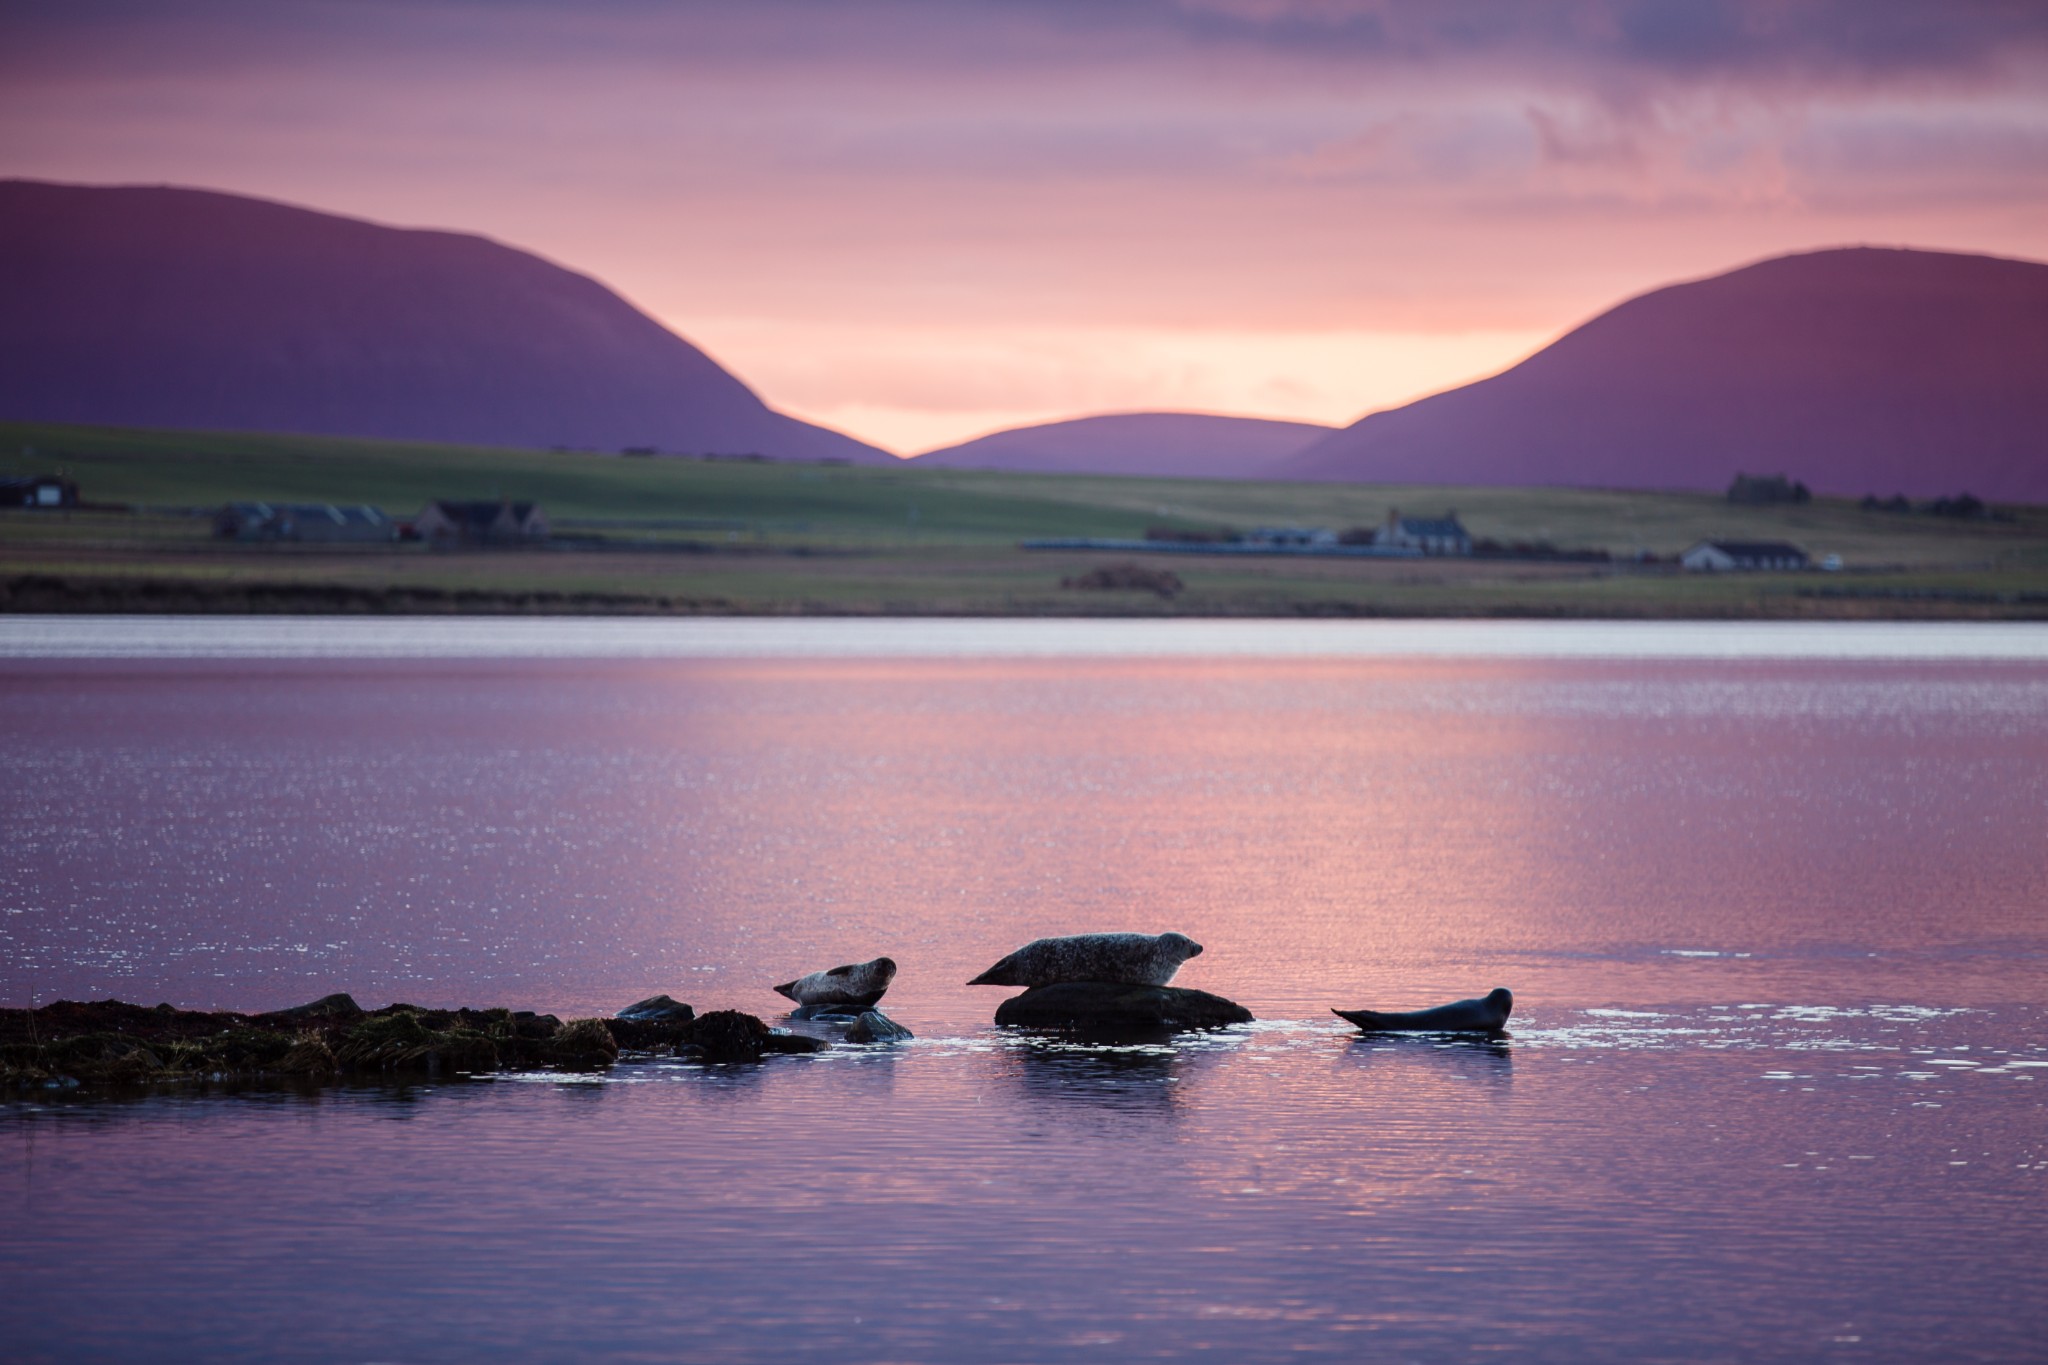 Seals at the Stenness Loch, Orkney